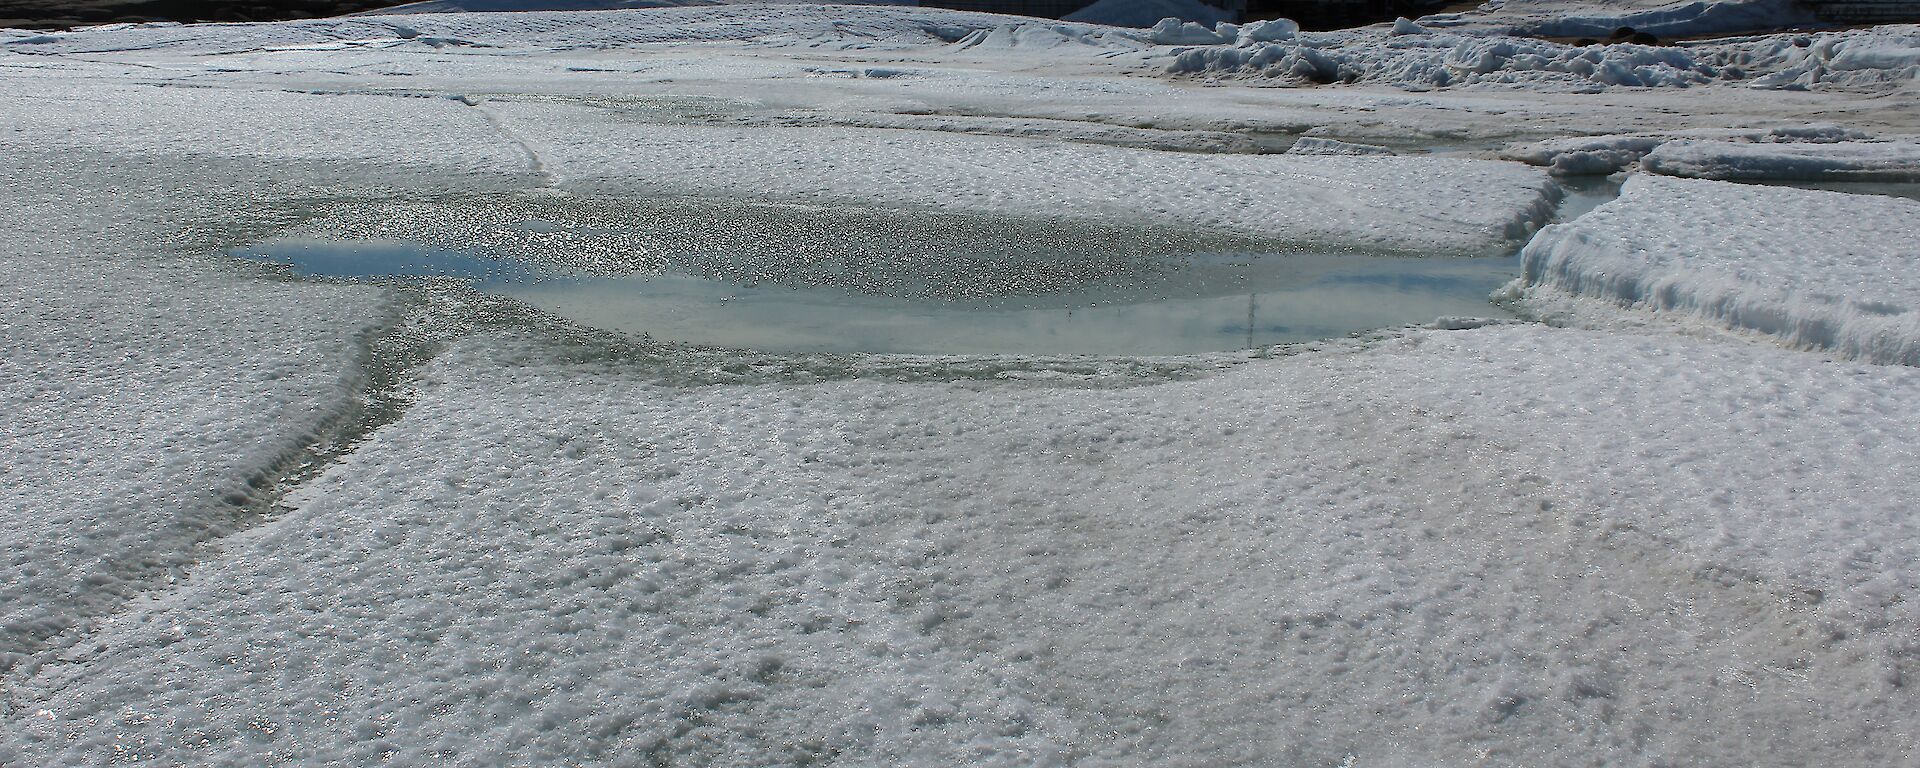 A picture of deteriorating Horseshoe Hrbour sea ice in front of the station